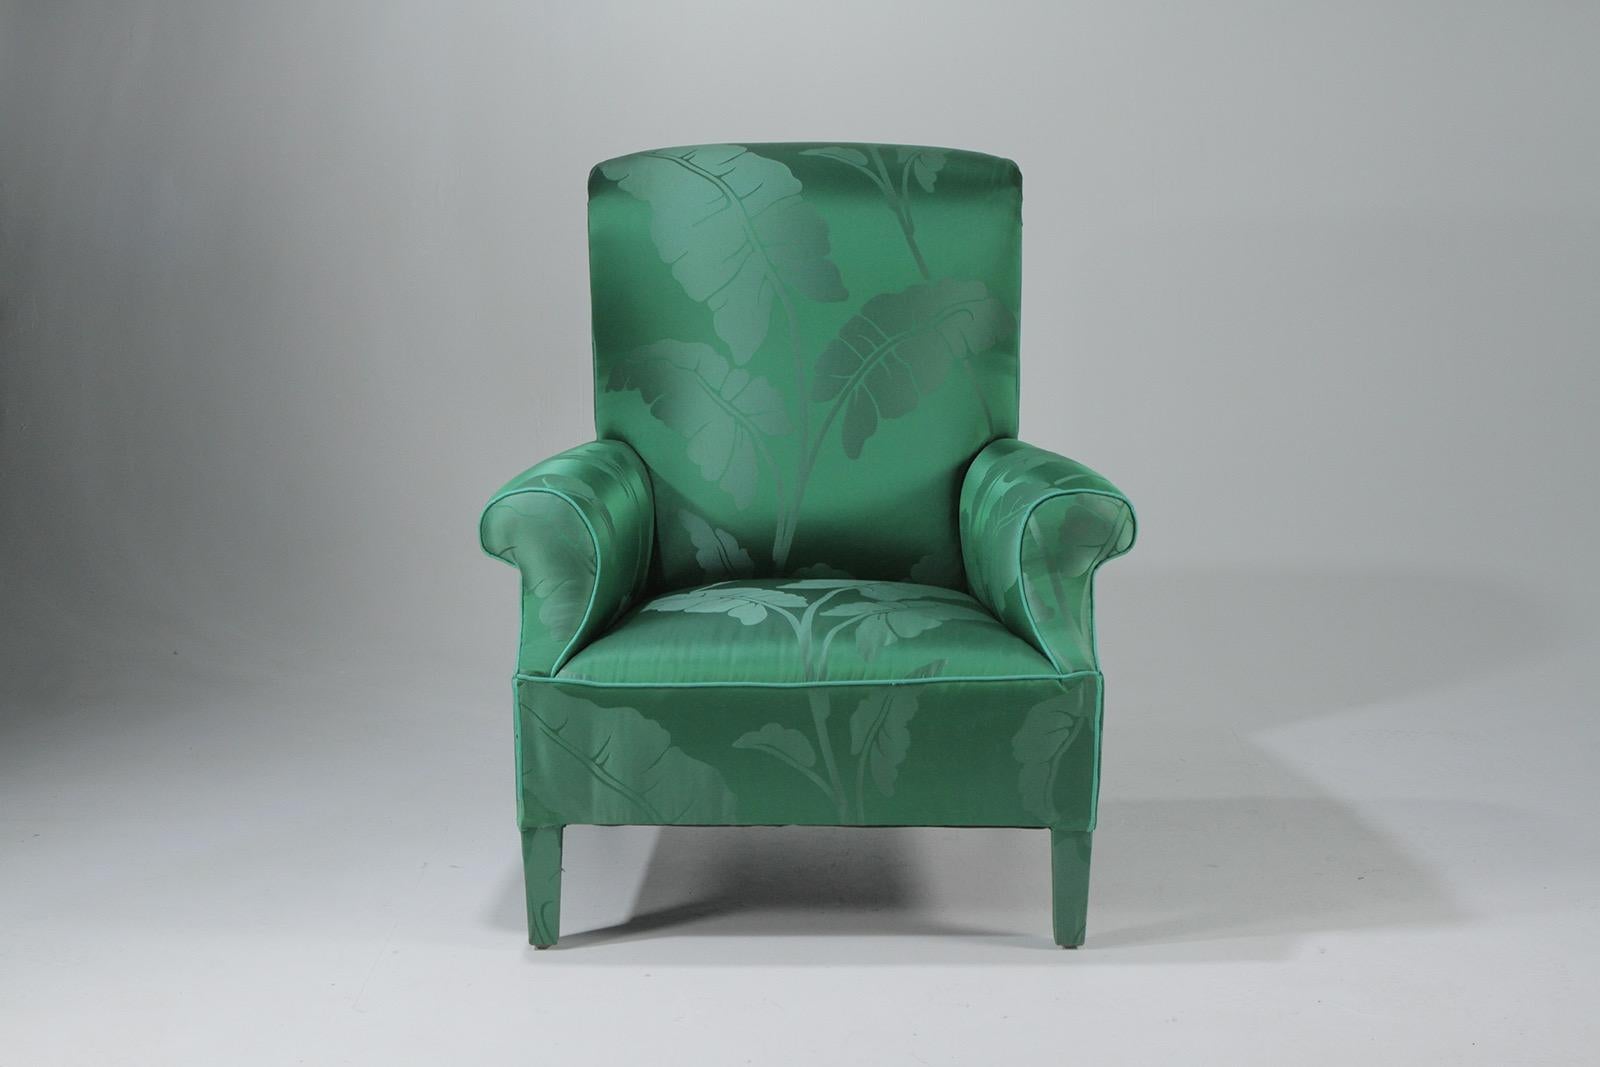 Eye-catching elegant antique club chair upholstered in a gorgeous emerald green silk.